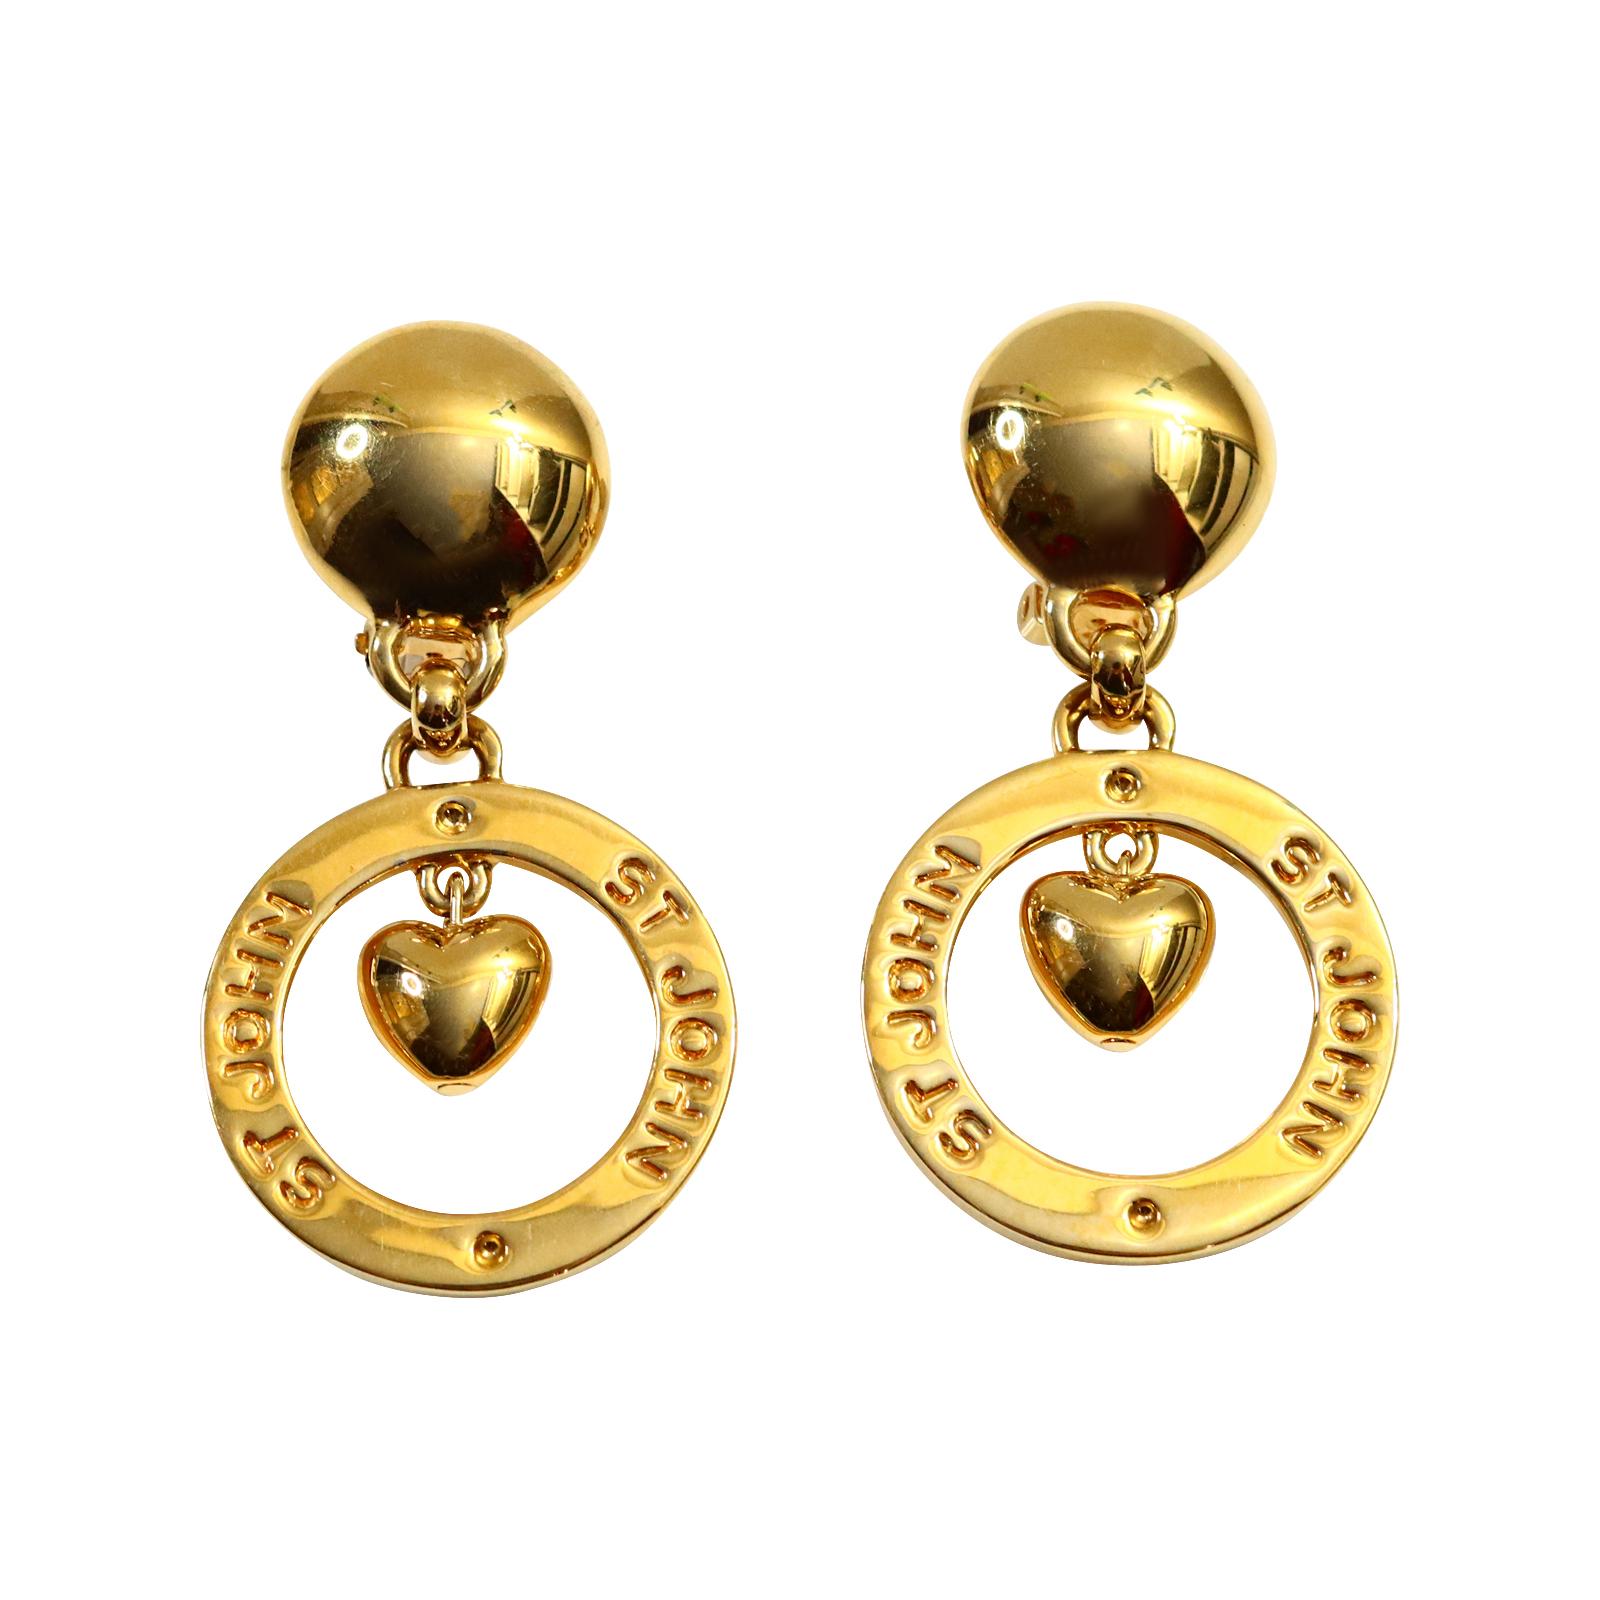 Vintage St John Gold dangling Heart Hoop Earrings Circa 1980s. St John made some great jewelry in the 1980s.  These dangling gold hearts look so chic and stunning with everything.  Substantial and well made. Clip On.